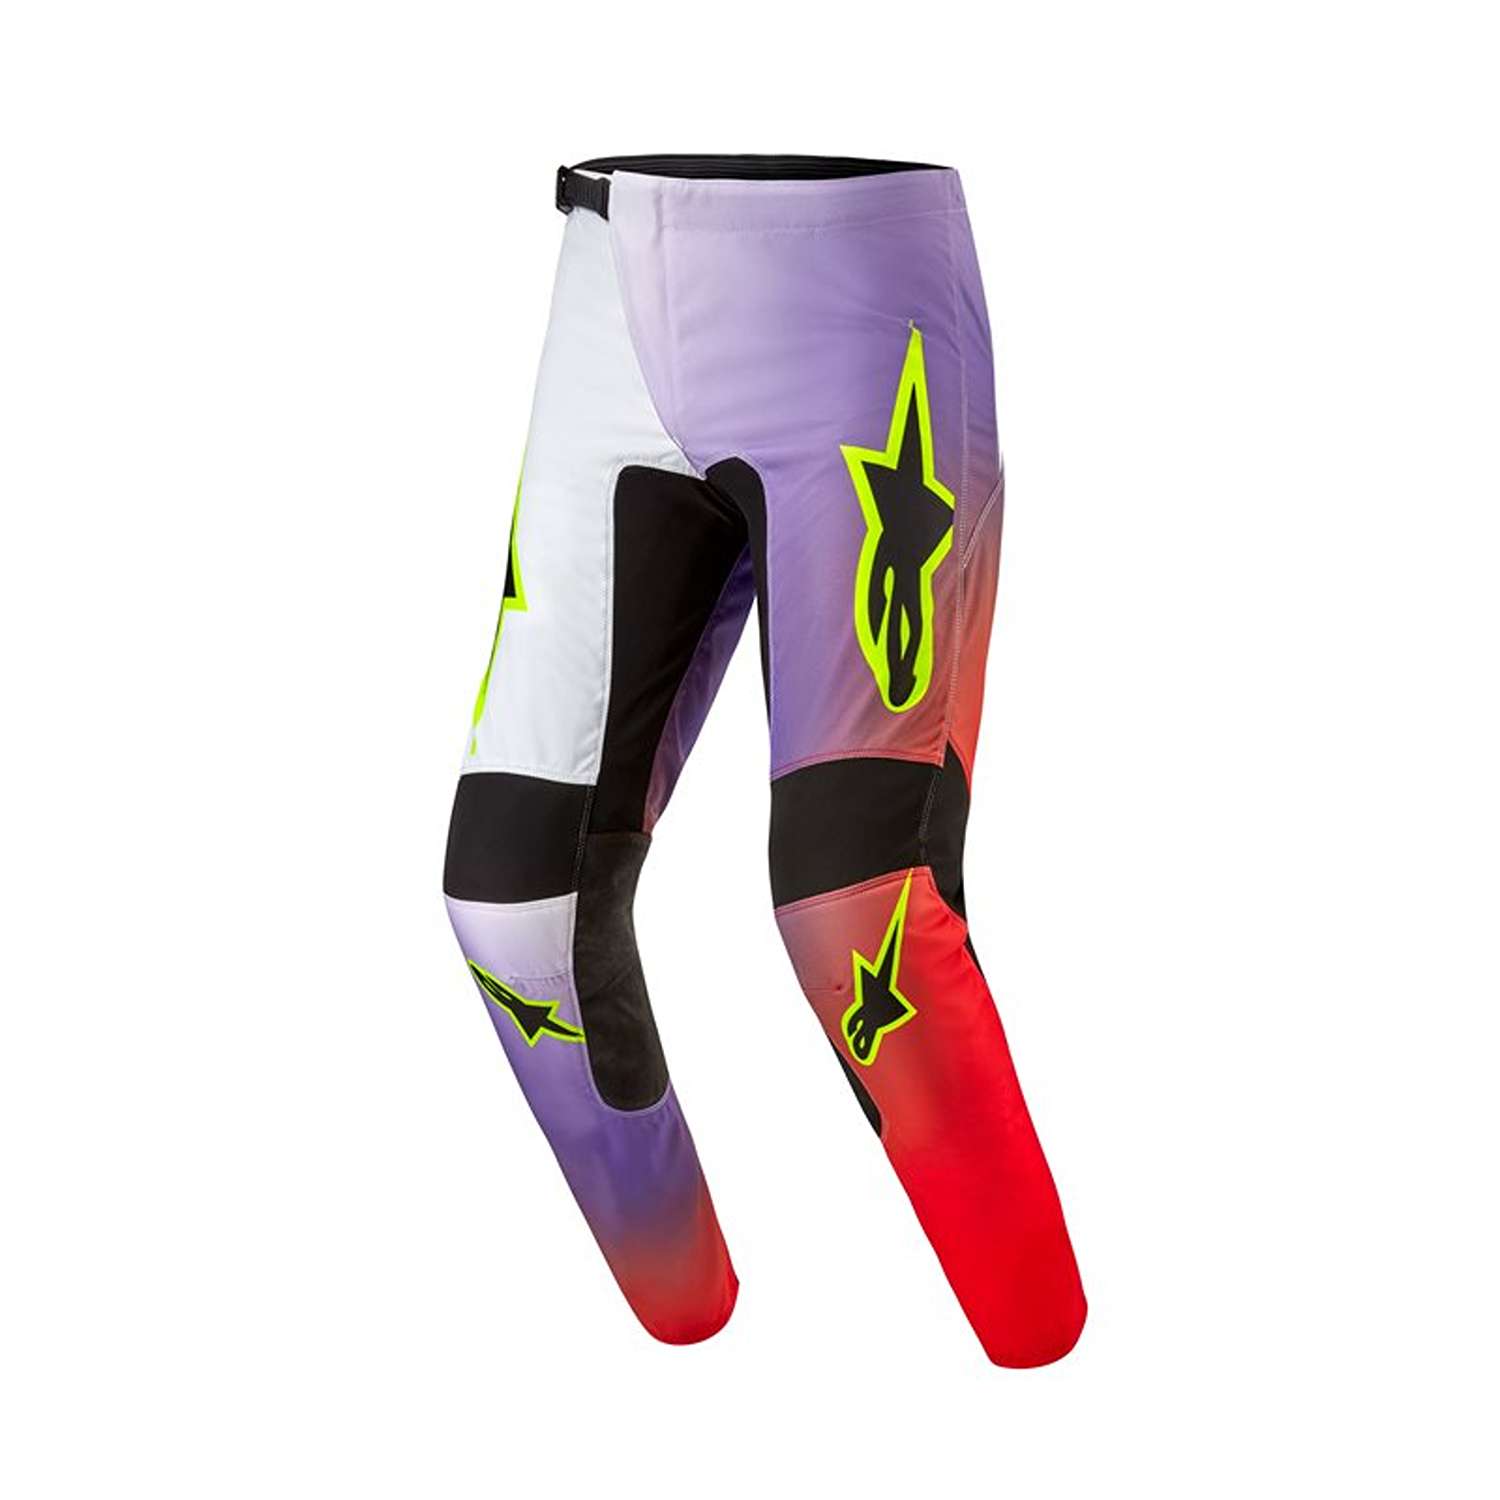 Image of Alpinestars Fluid Lucent Pants White Neon Red Yellow Fluo Größe 40